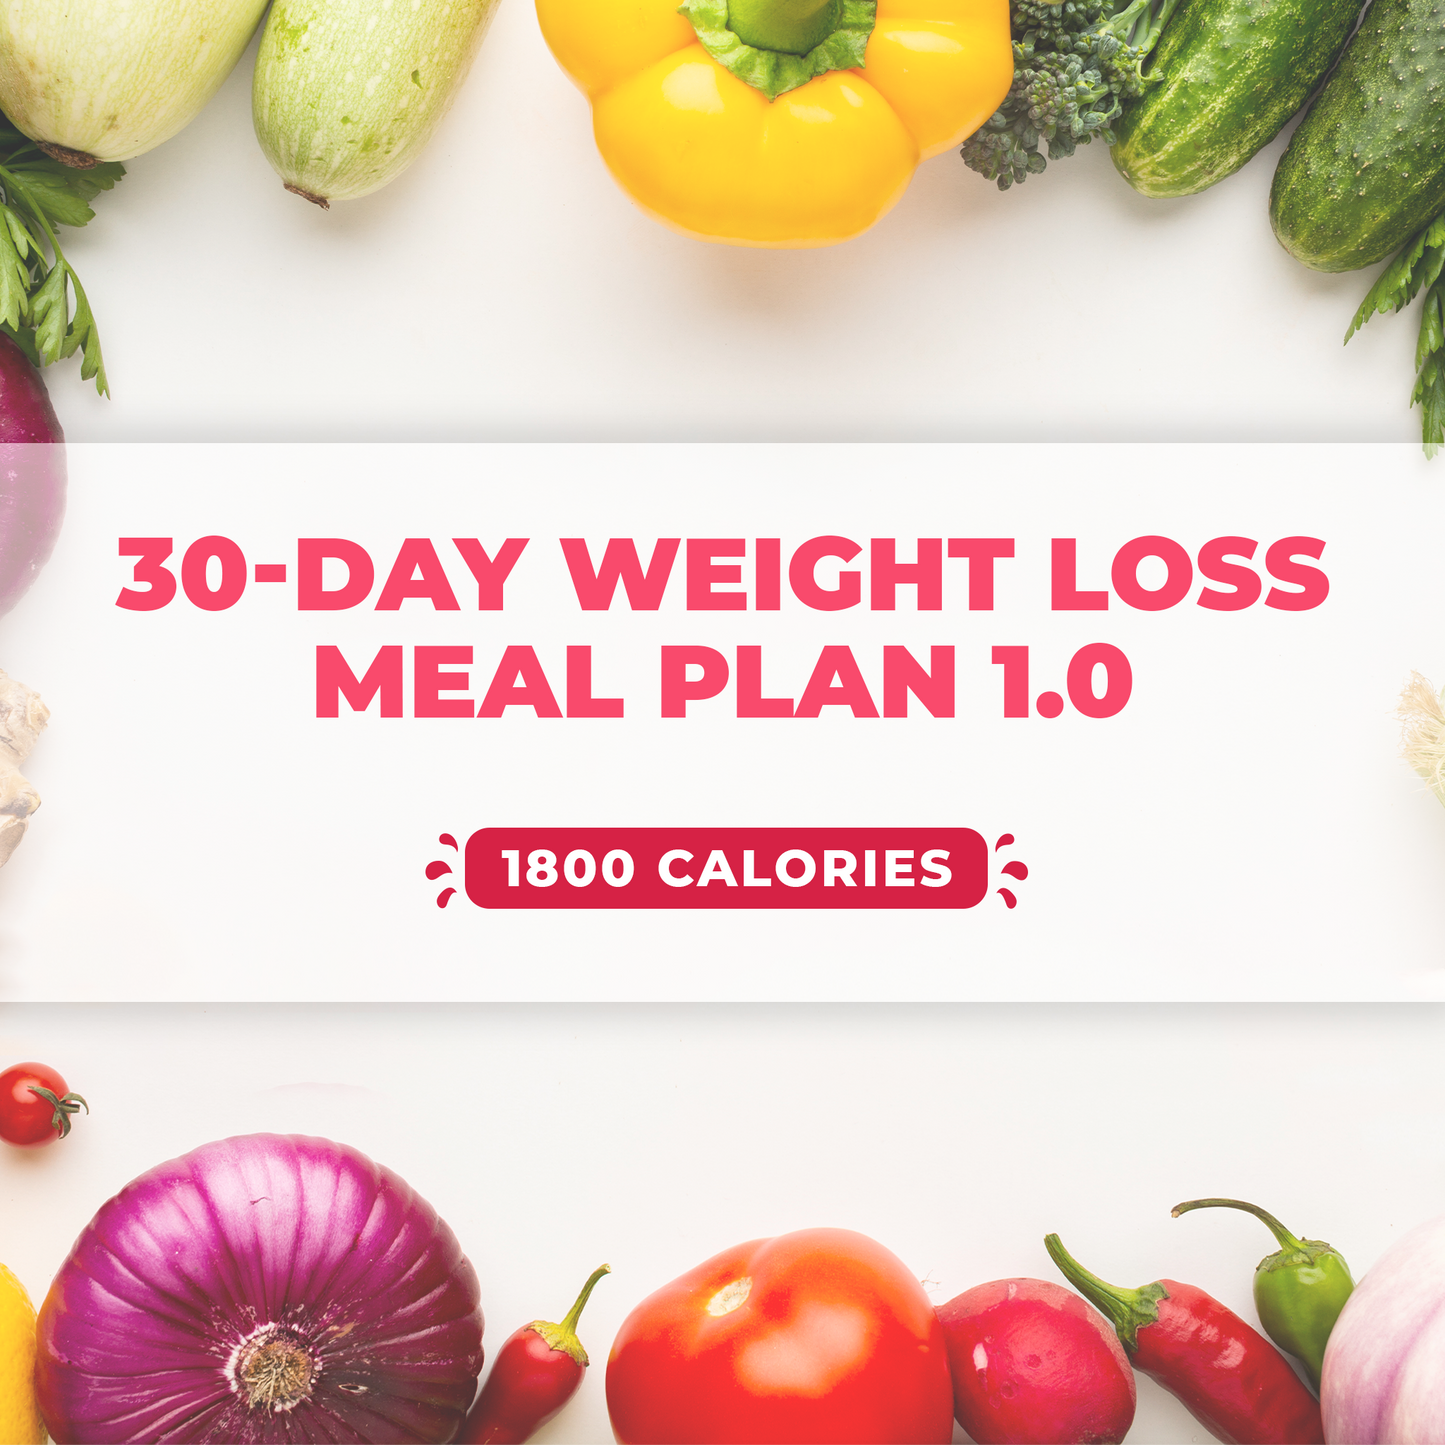 30-Day Weight Loss Meal Plan 1.0 (1800 Calories)